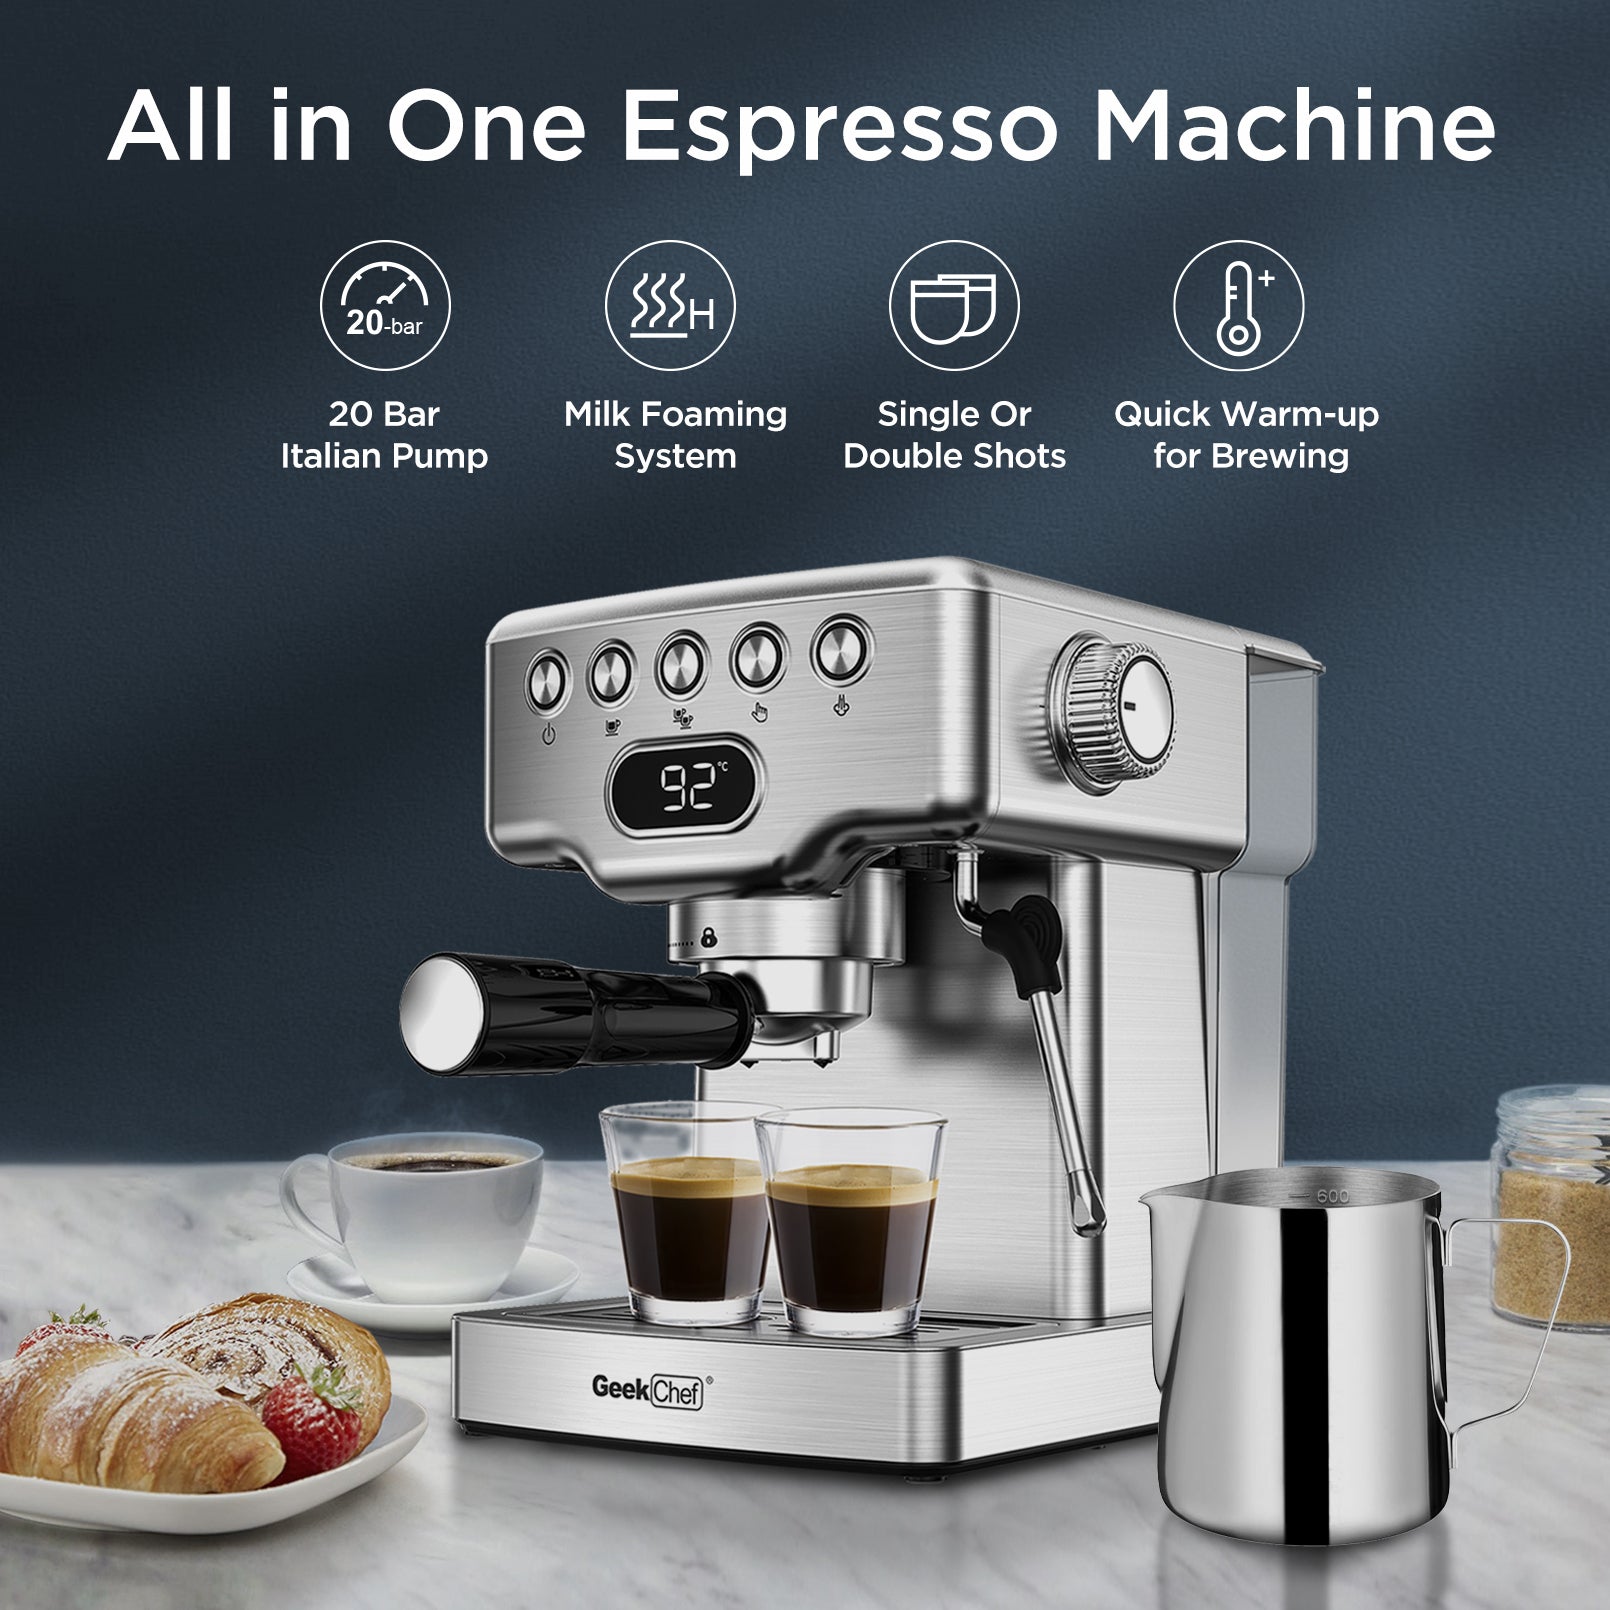 Geek-Chef-Espresso-Machine,20-bar-espresso-machine-with-milk-frother-for-latte,cappuccino,Machiato,for-home-espresso-maker,1.8L-Water-Tank,Stainless-Steel-Complimentary-ESE-Filter-Ban-on-Amazon-kitchen-appliance